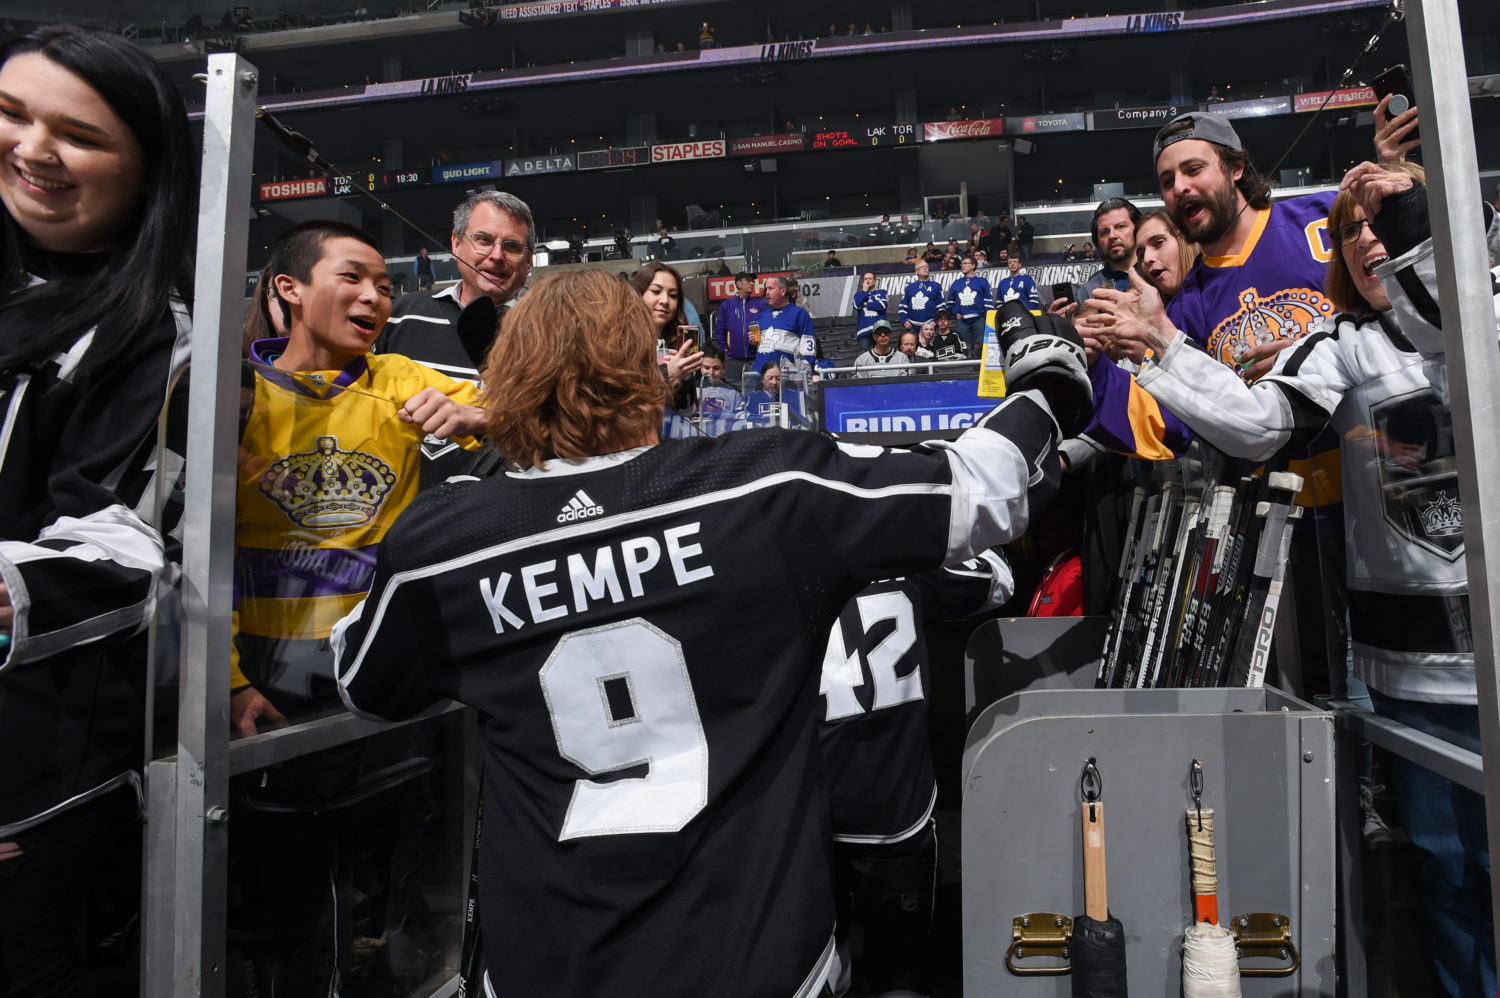 One New Thing Daily: LA Kings game center court Staples Center